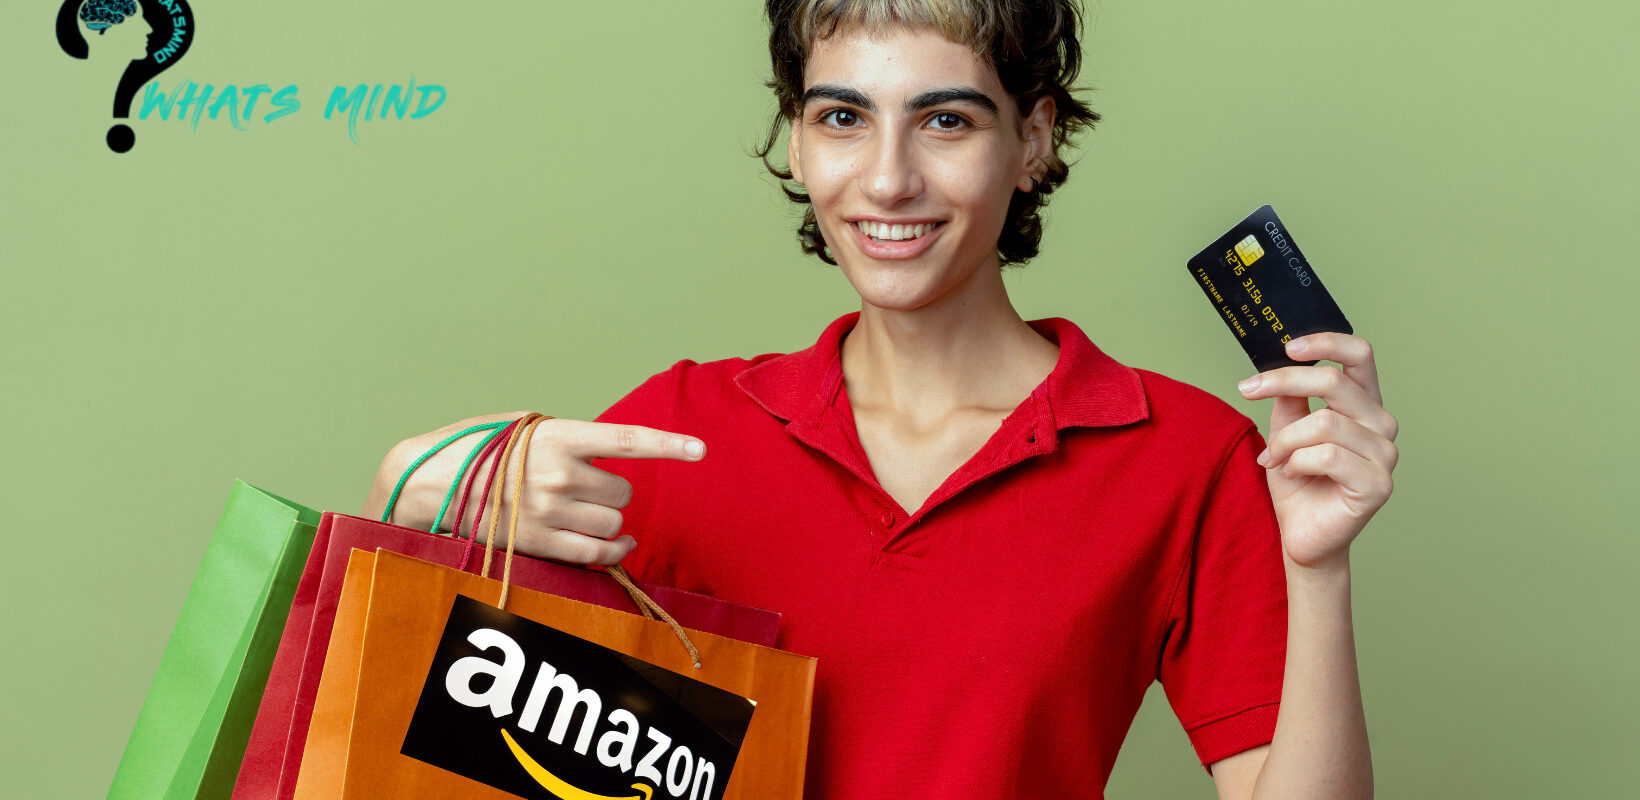 How to use visa gift card on Amazon?